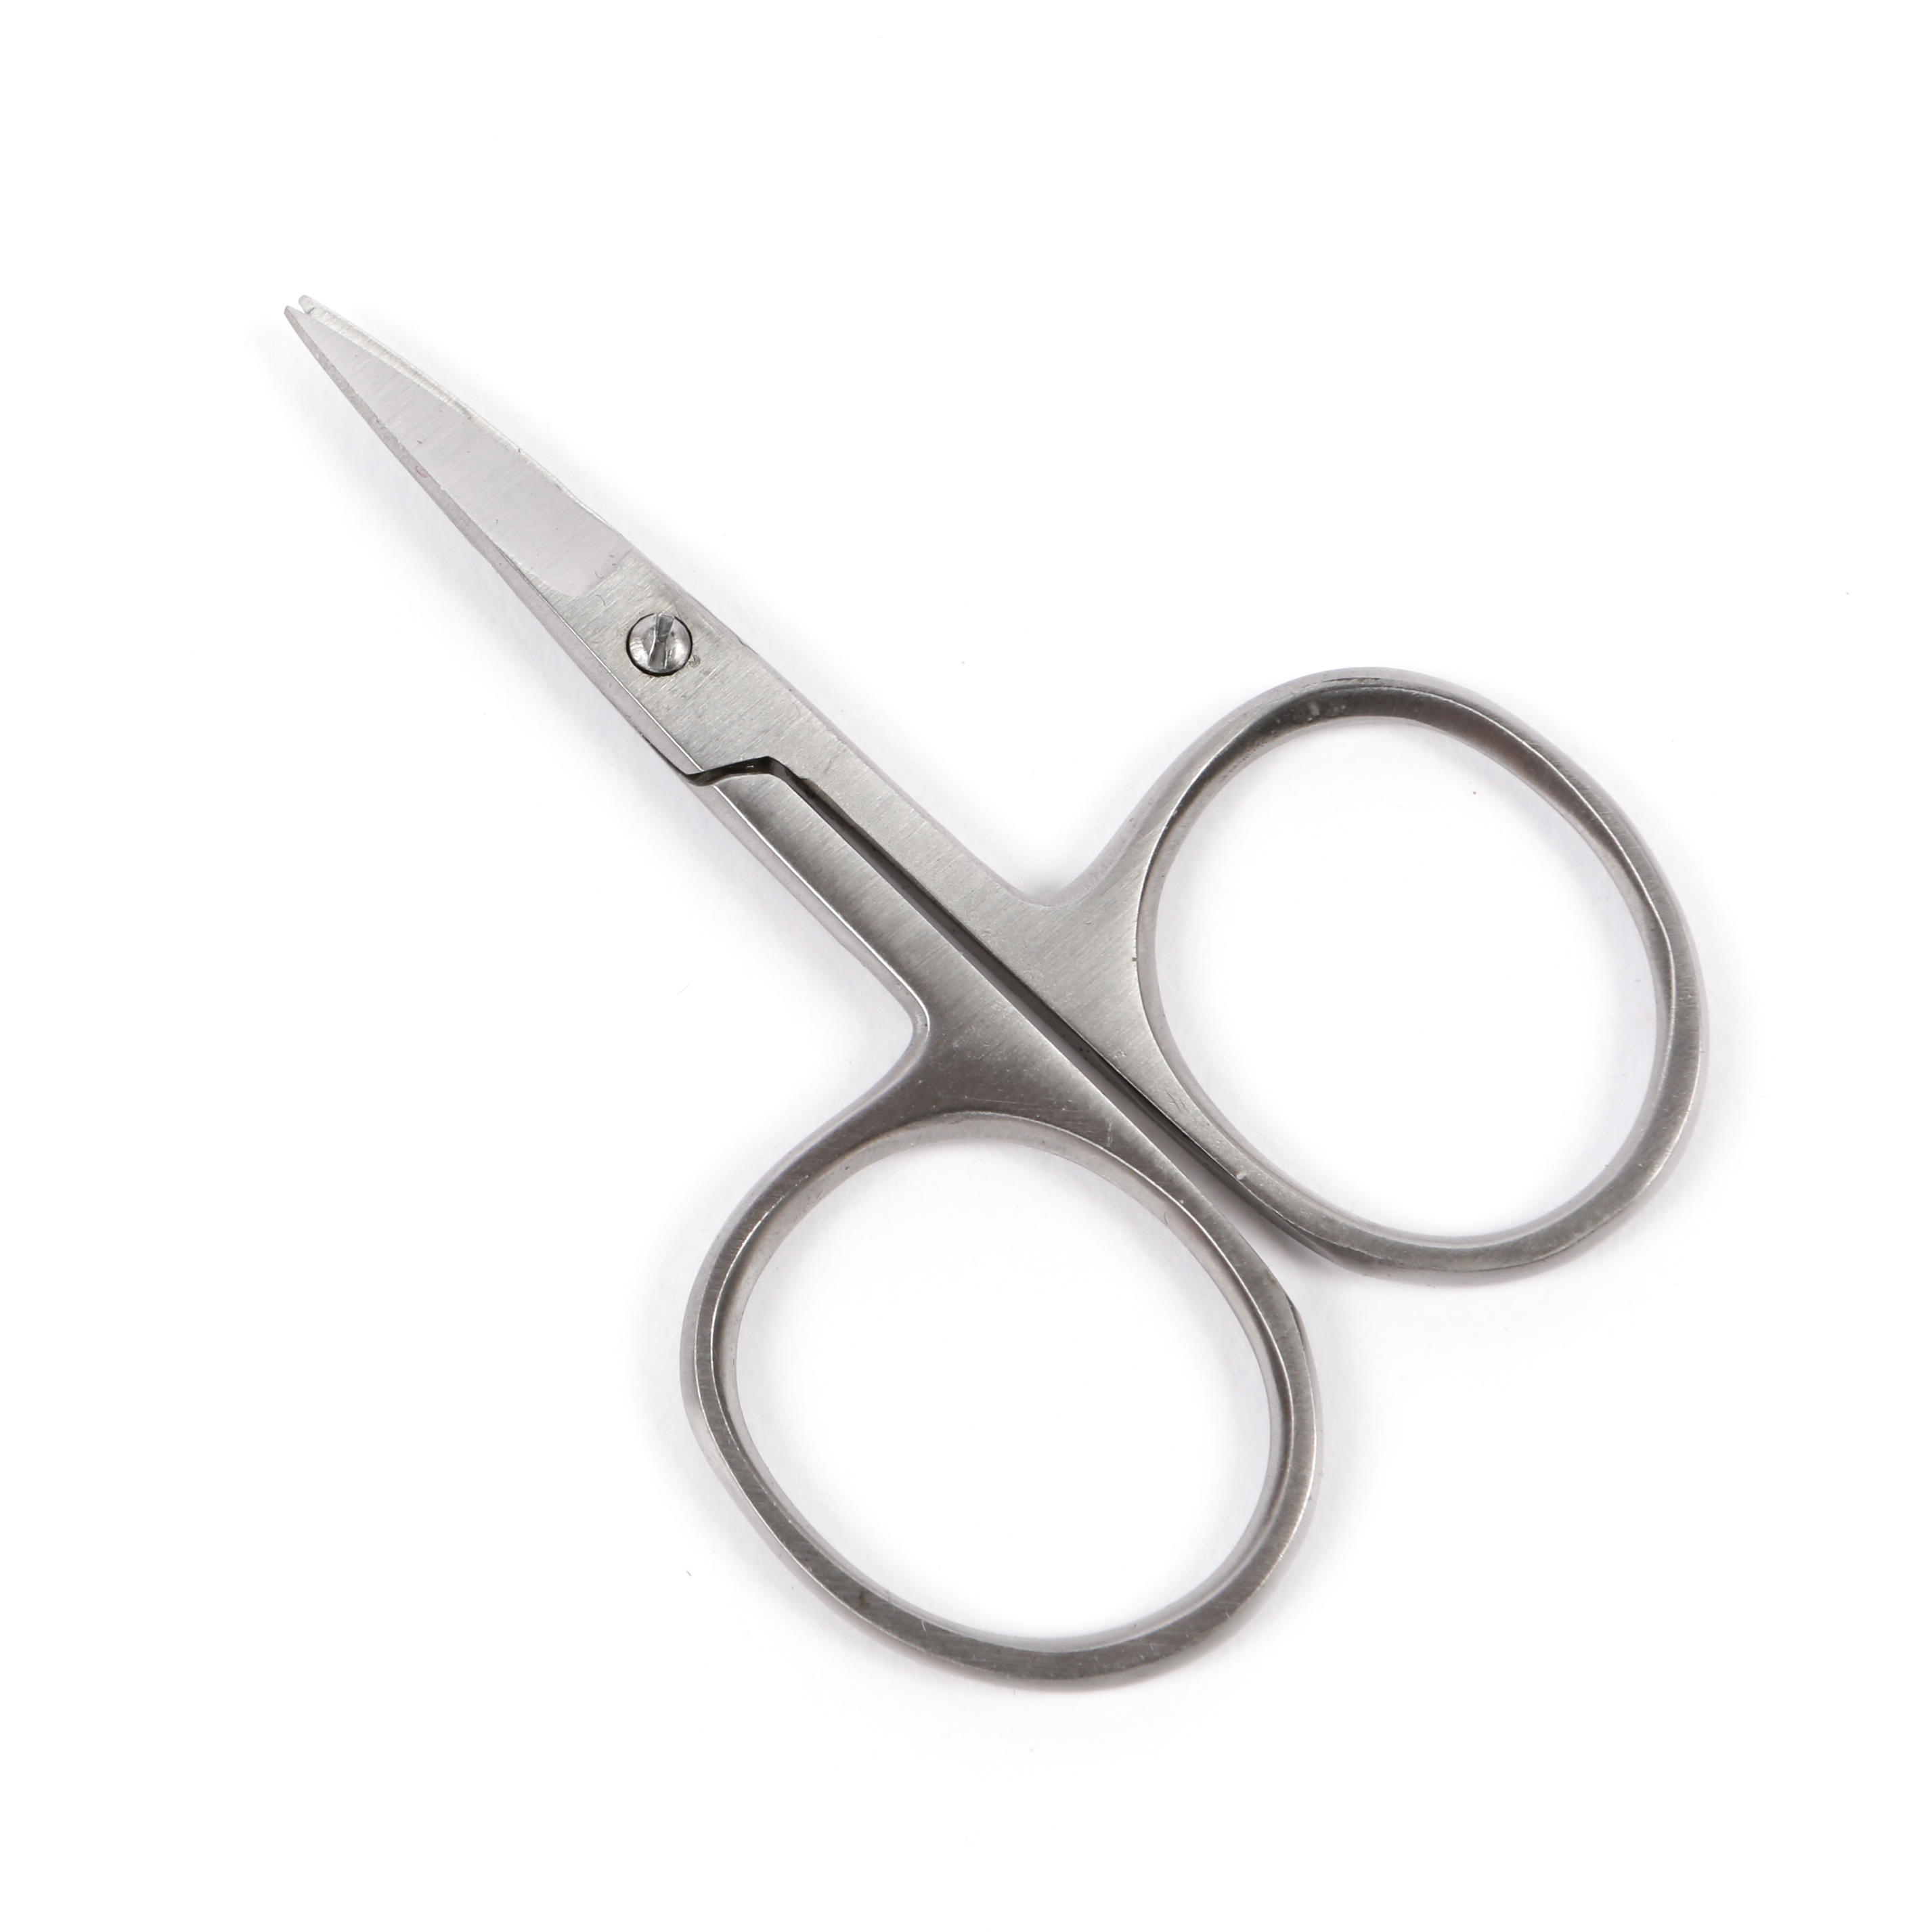 40 x Stainless Steel Nail Scissors (UNBRANDED)